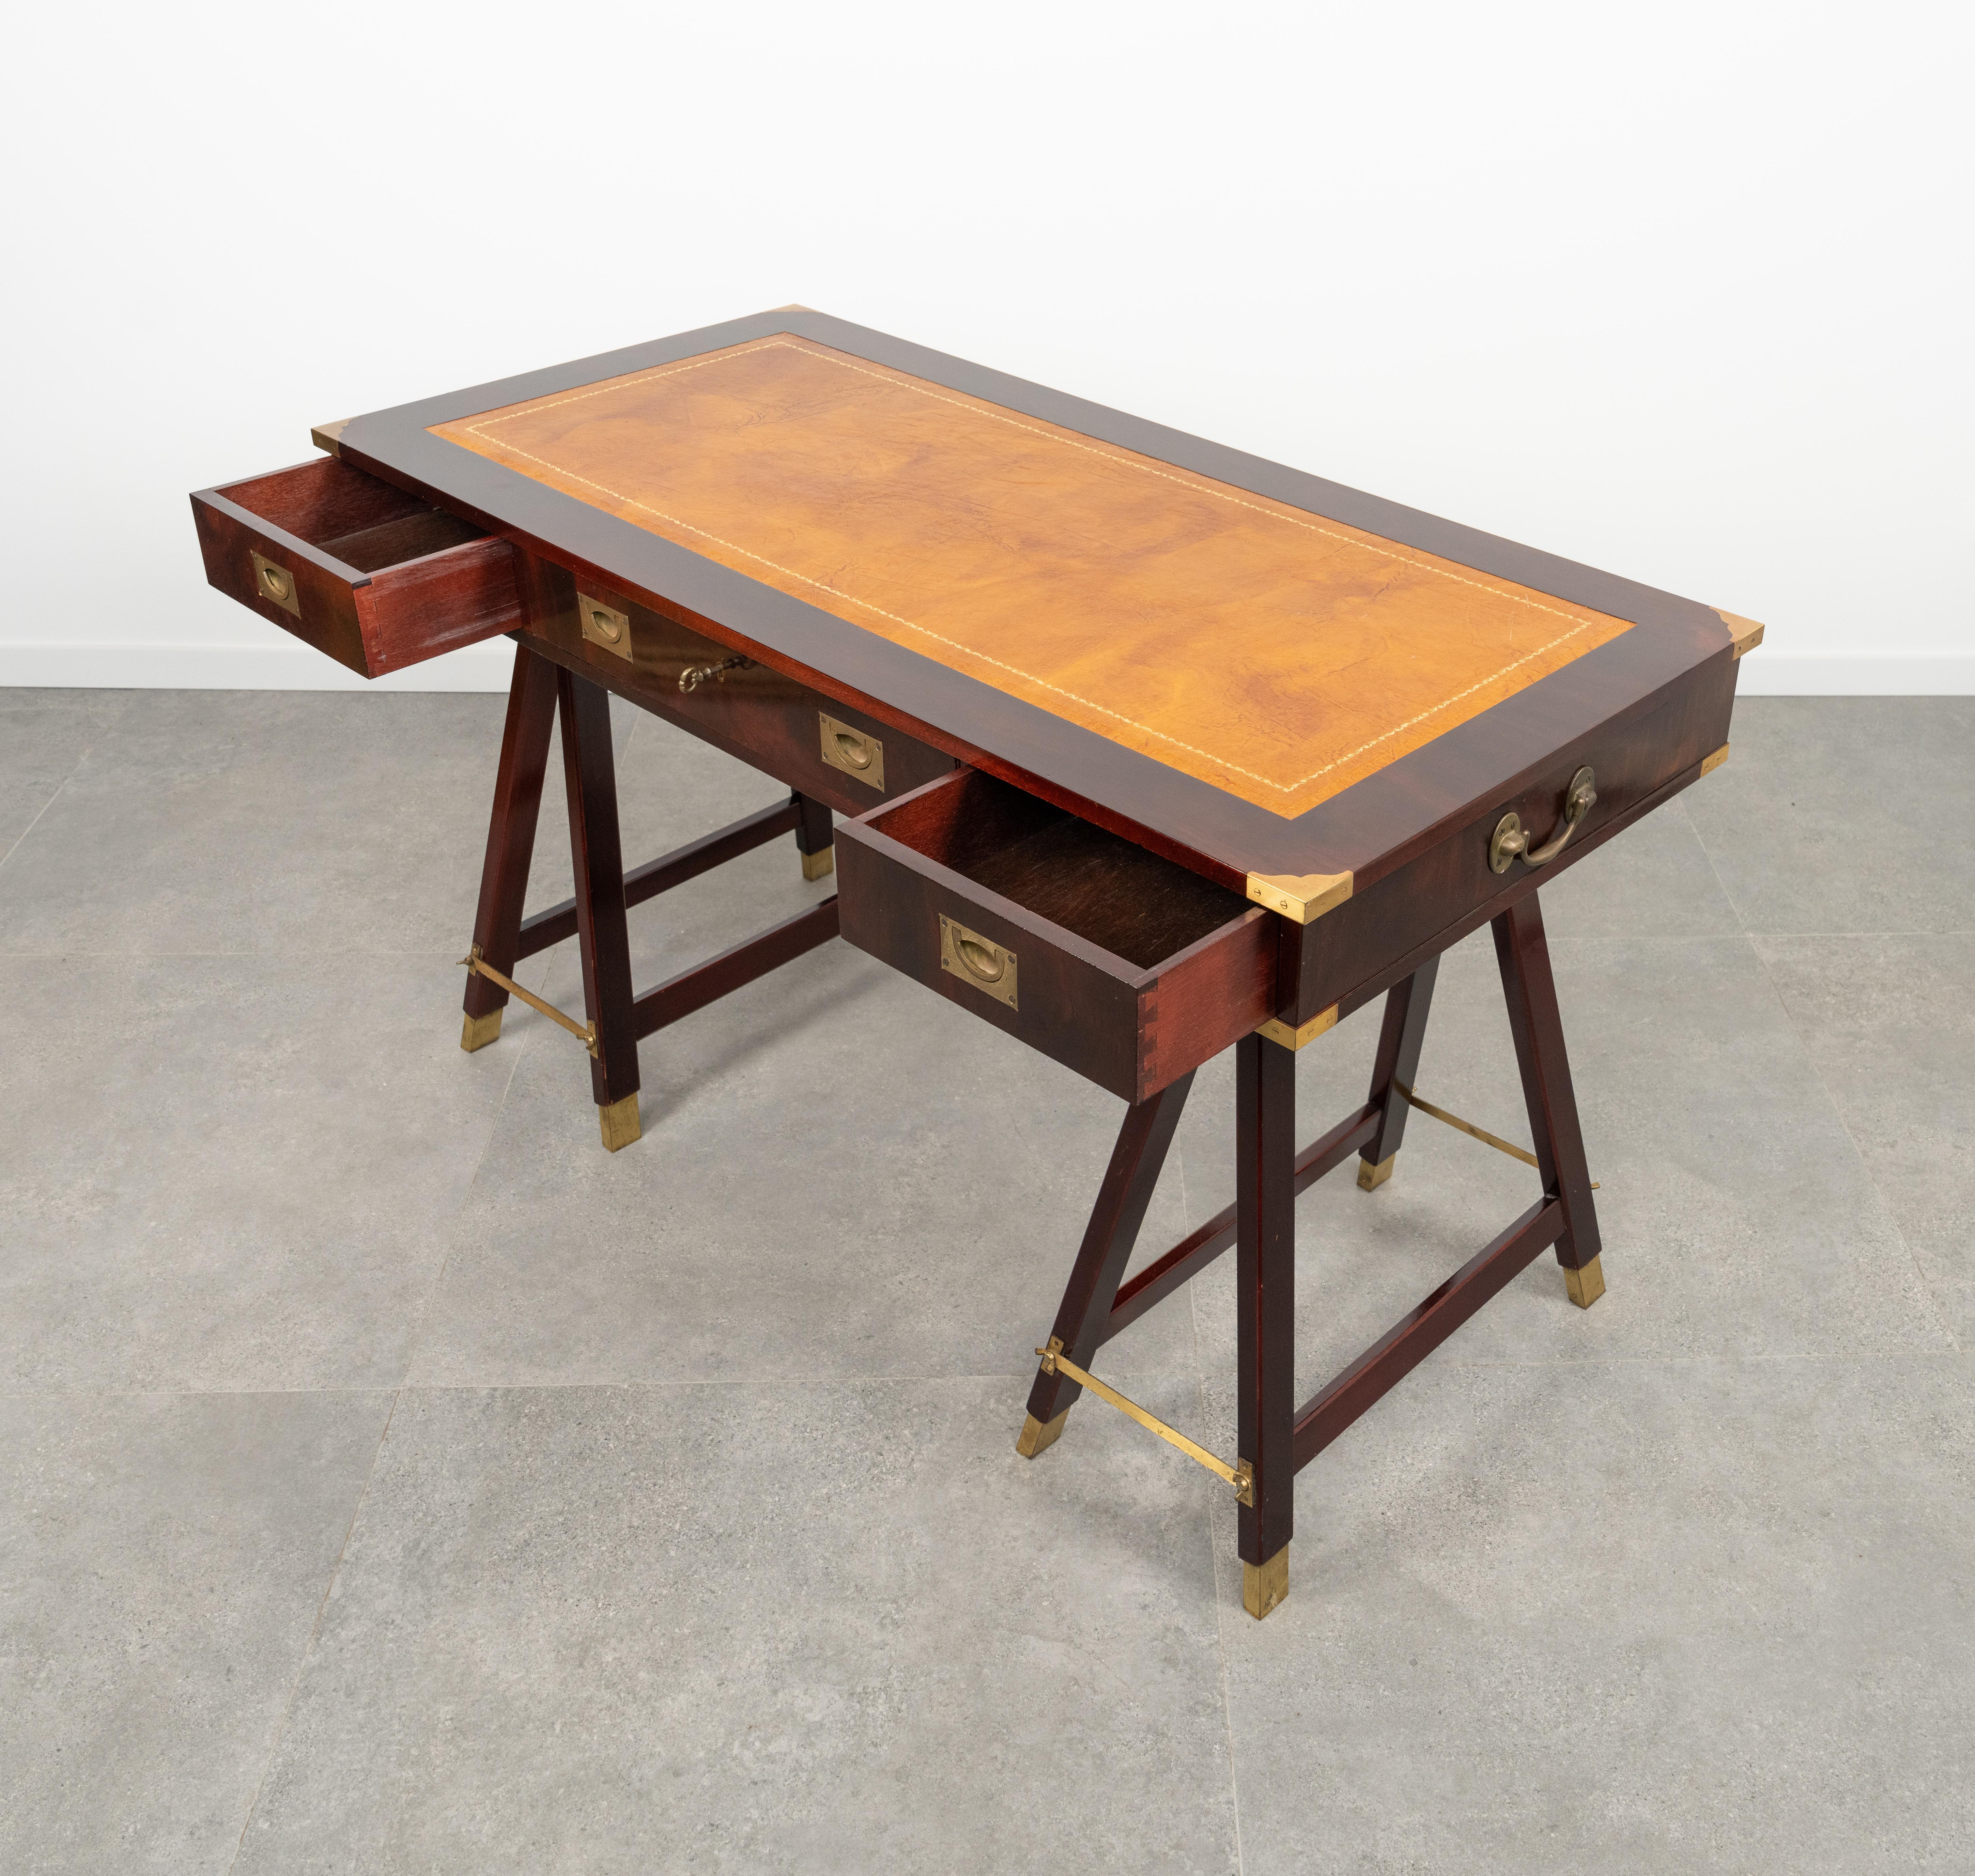 Military Campaign Style Desk Table in Wood, Brass and Leather, Italy 1960s For Sale 8